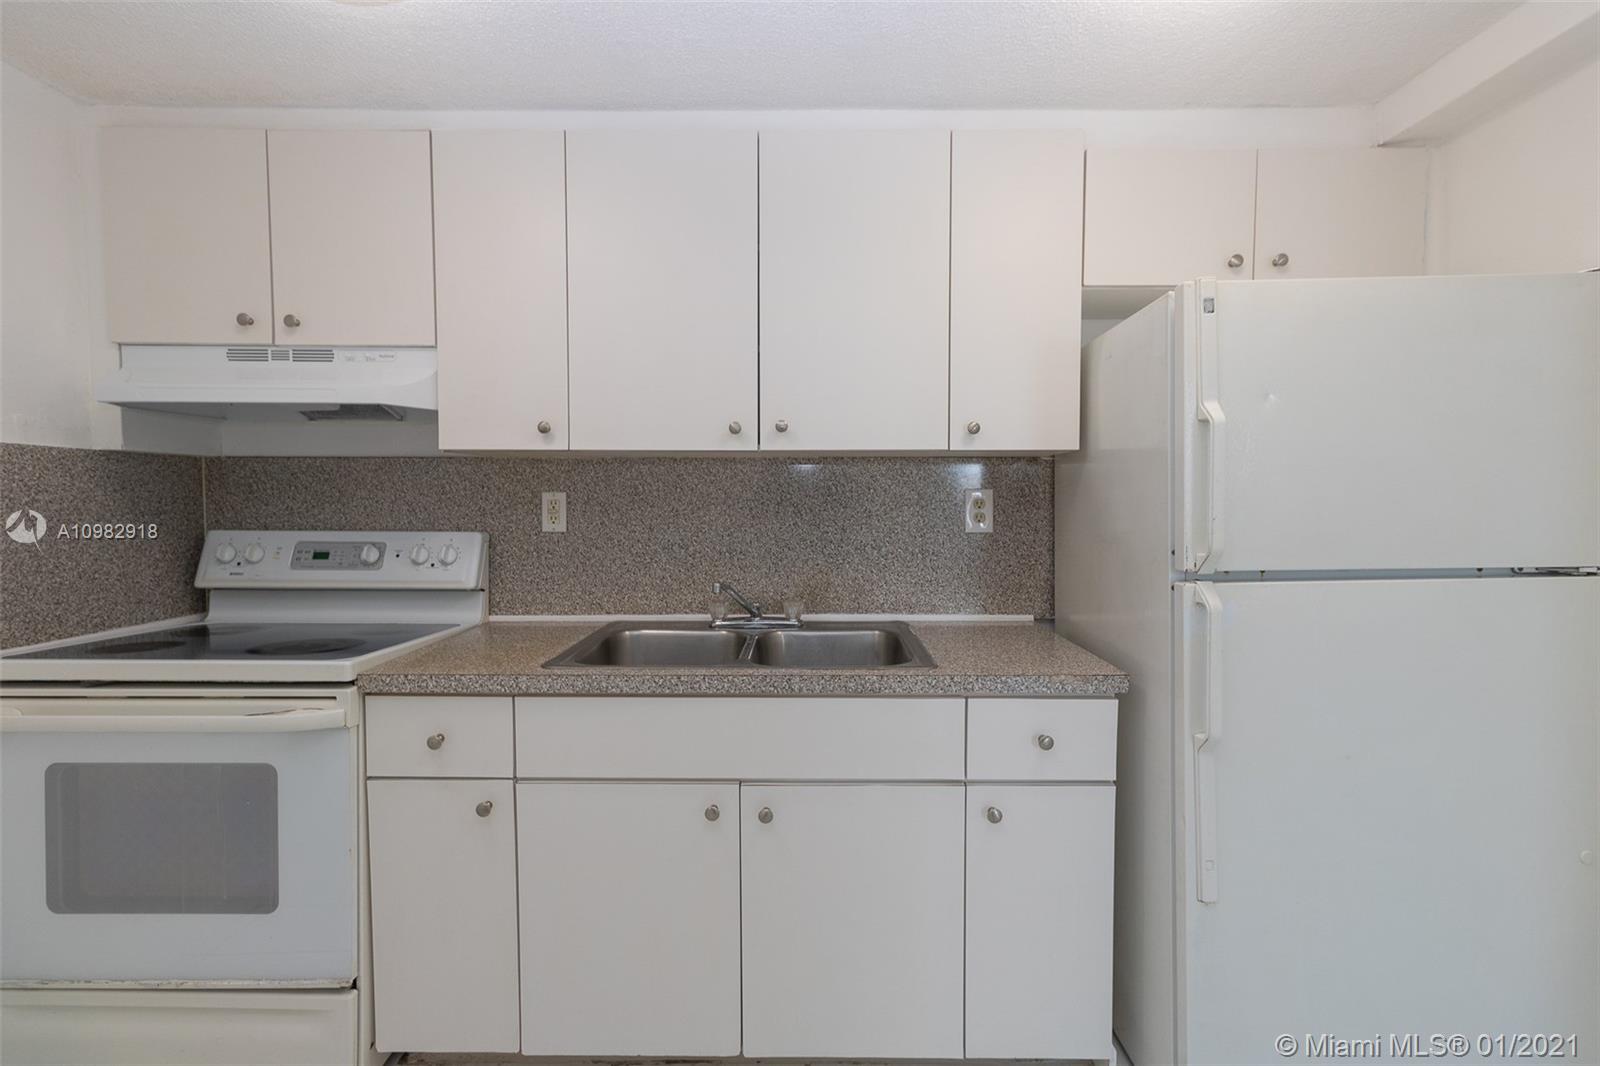 a kitchen with stainless steel appliances granite countertop white refrigerator stove and white cabinets